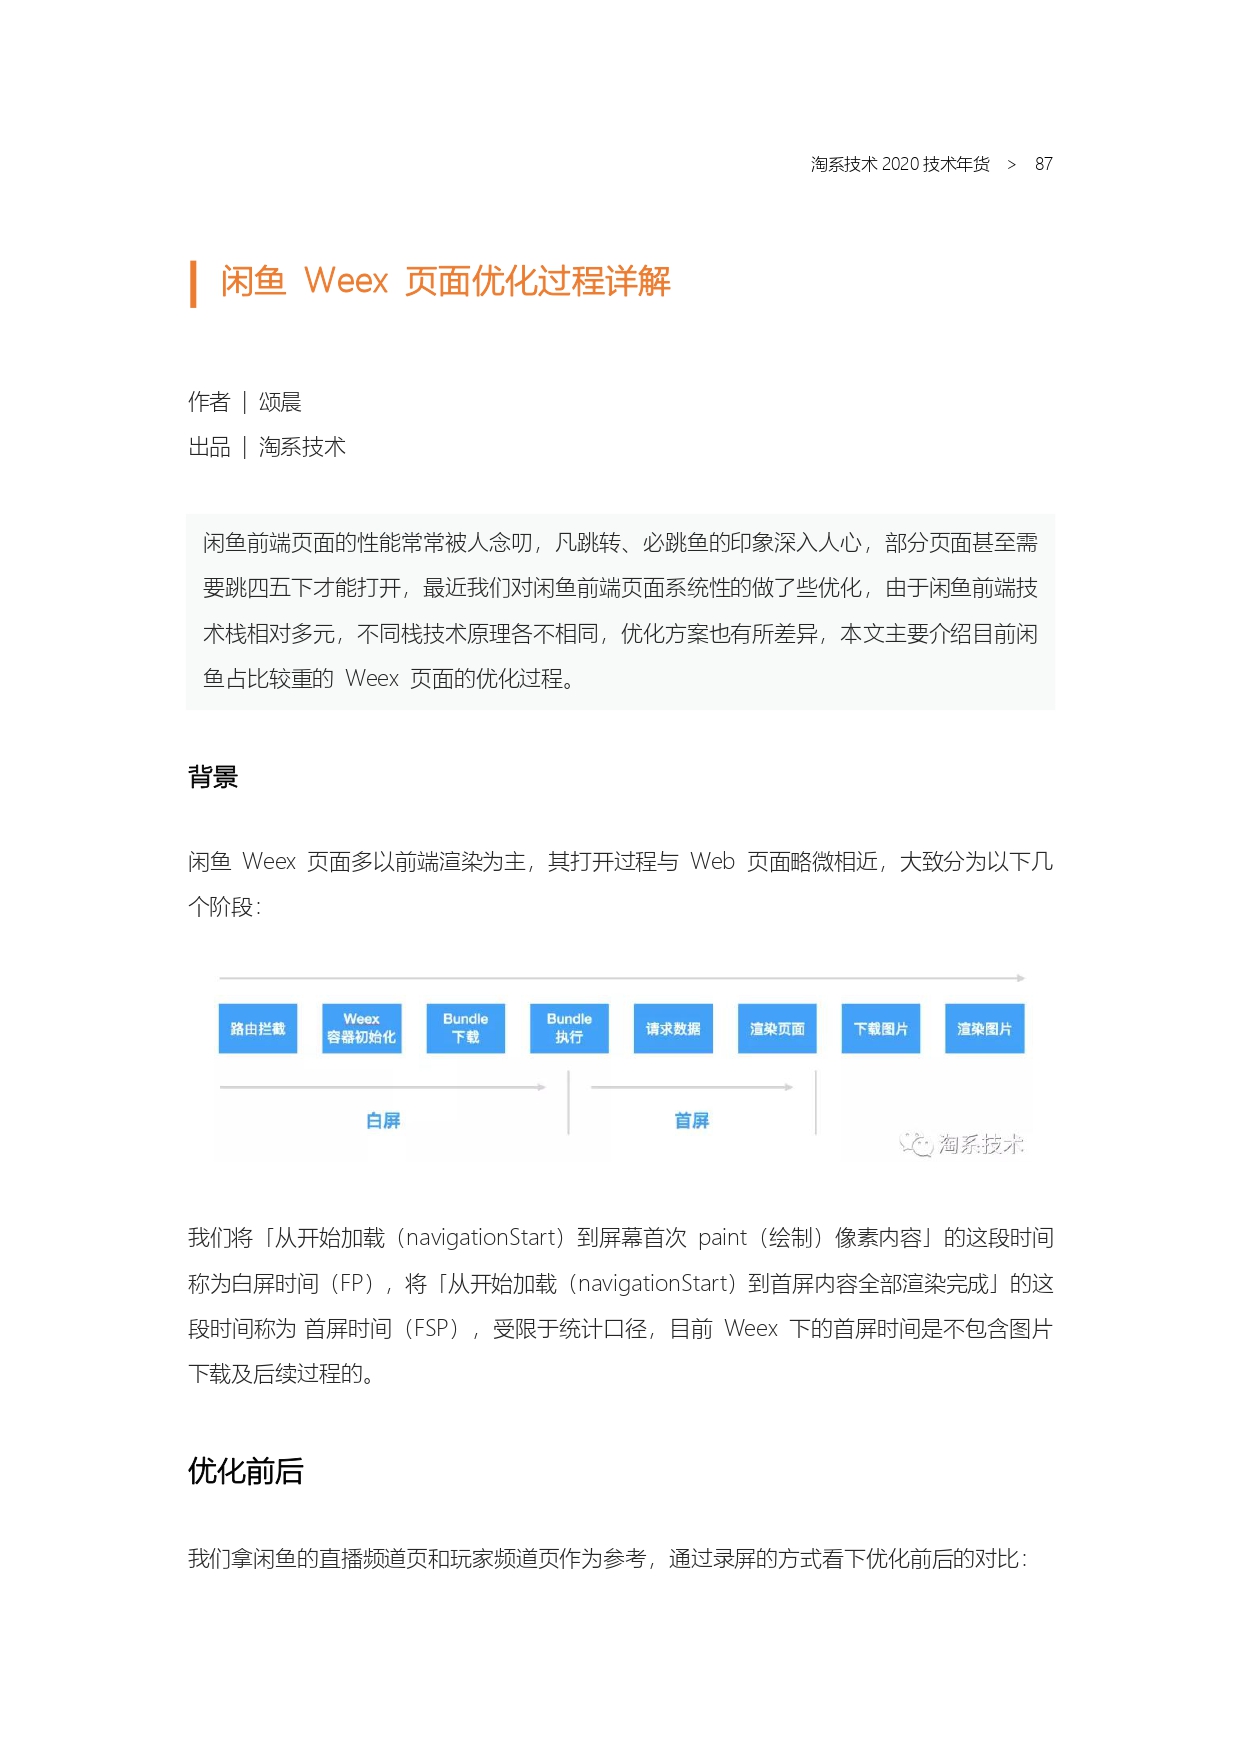 The Complete Works of Tao Technology 2020-1-570_page-0087.jpg